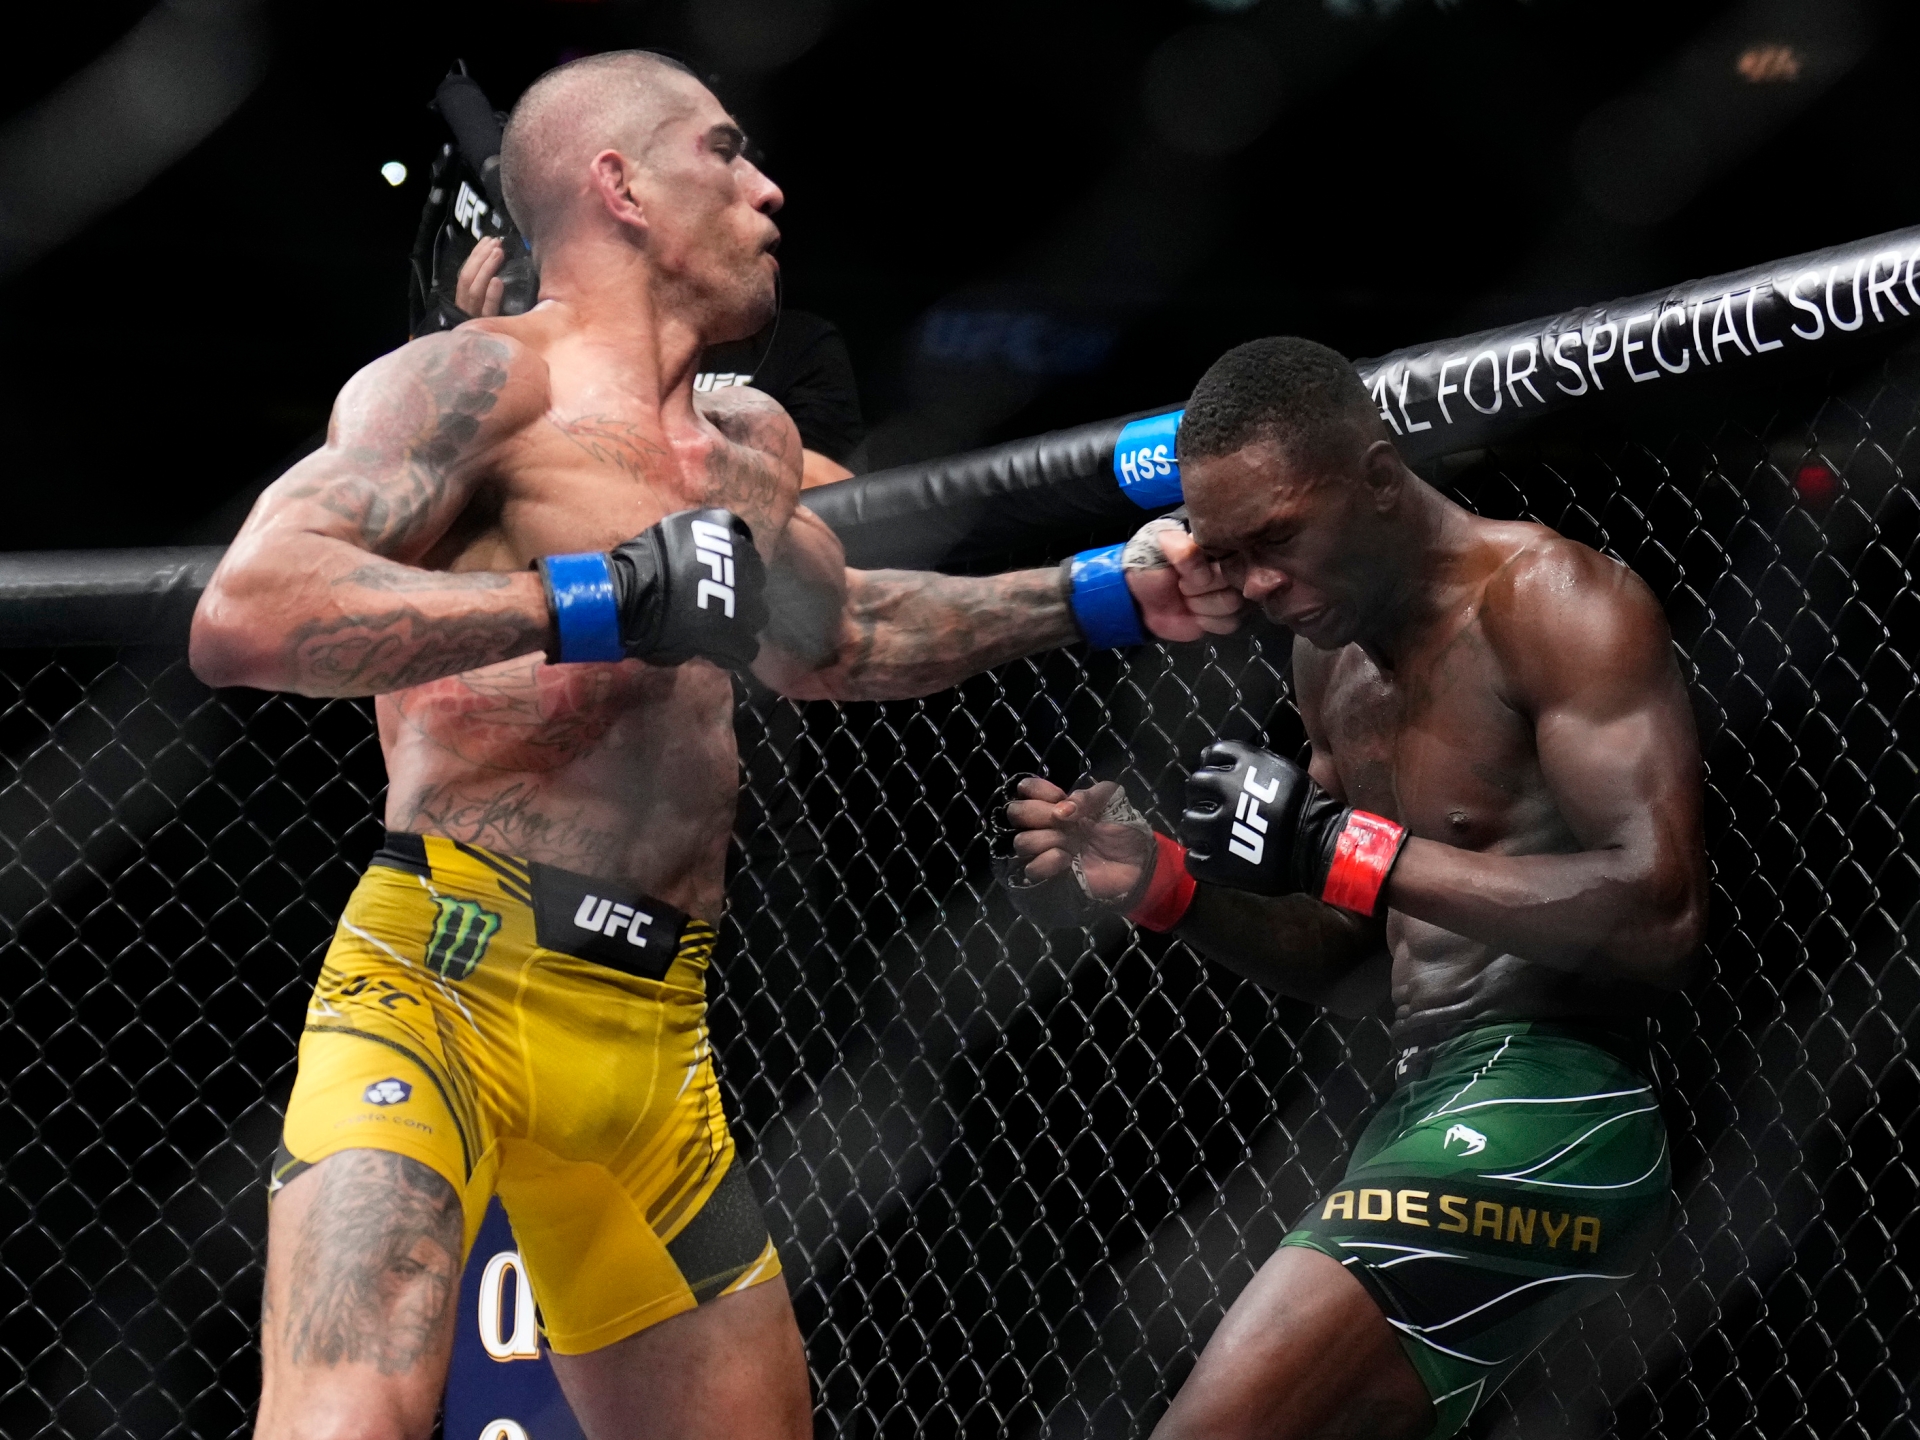 Alex Pereira KNOCKS OUT Israel Adesanya again to become middleweight champion at UFC 281 after previously beating 'Stylebender' twice in kickboxing rivalry that included brutal finish